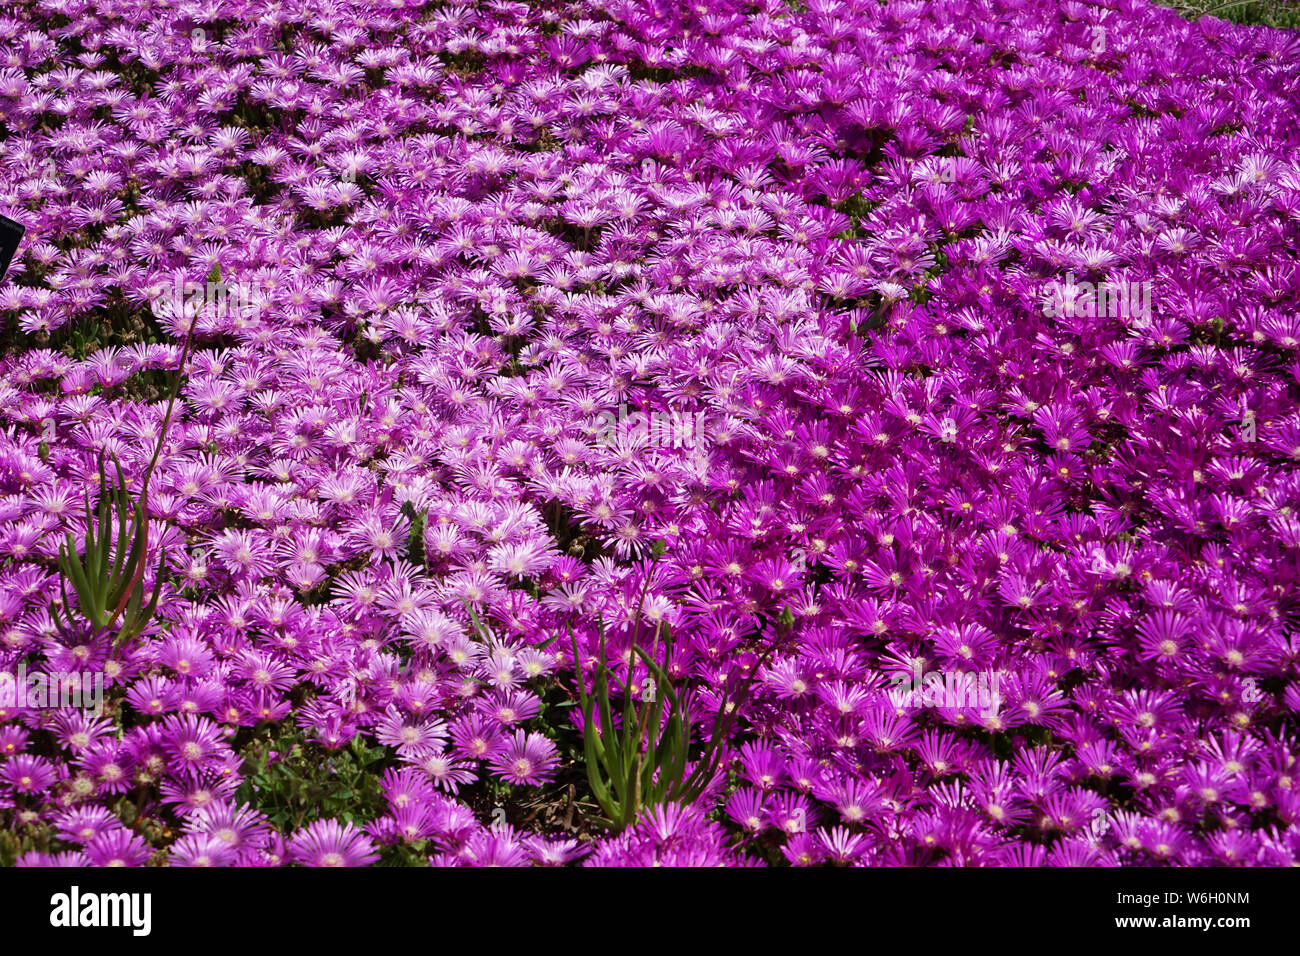 A carpet of bright fuchsia colored ice plants.  The ice plant is a perennial that is excellent as a ground cover. Stock Photo